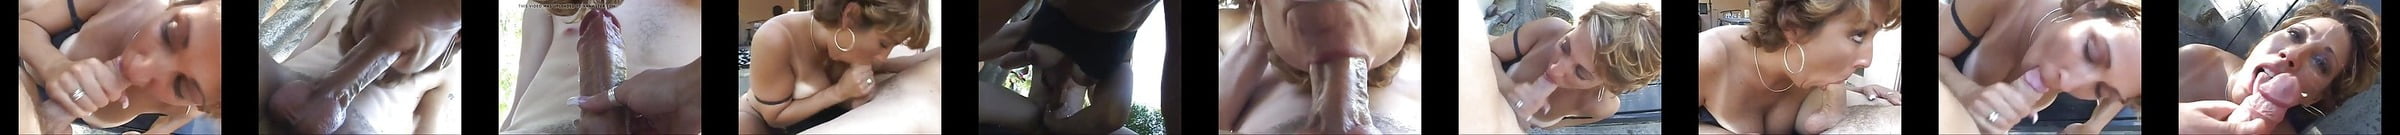 Mature With Big Saggy Tits Outdoor Swallow Free Hd Porn 4a Xhamster